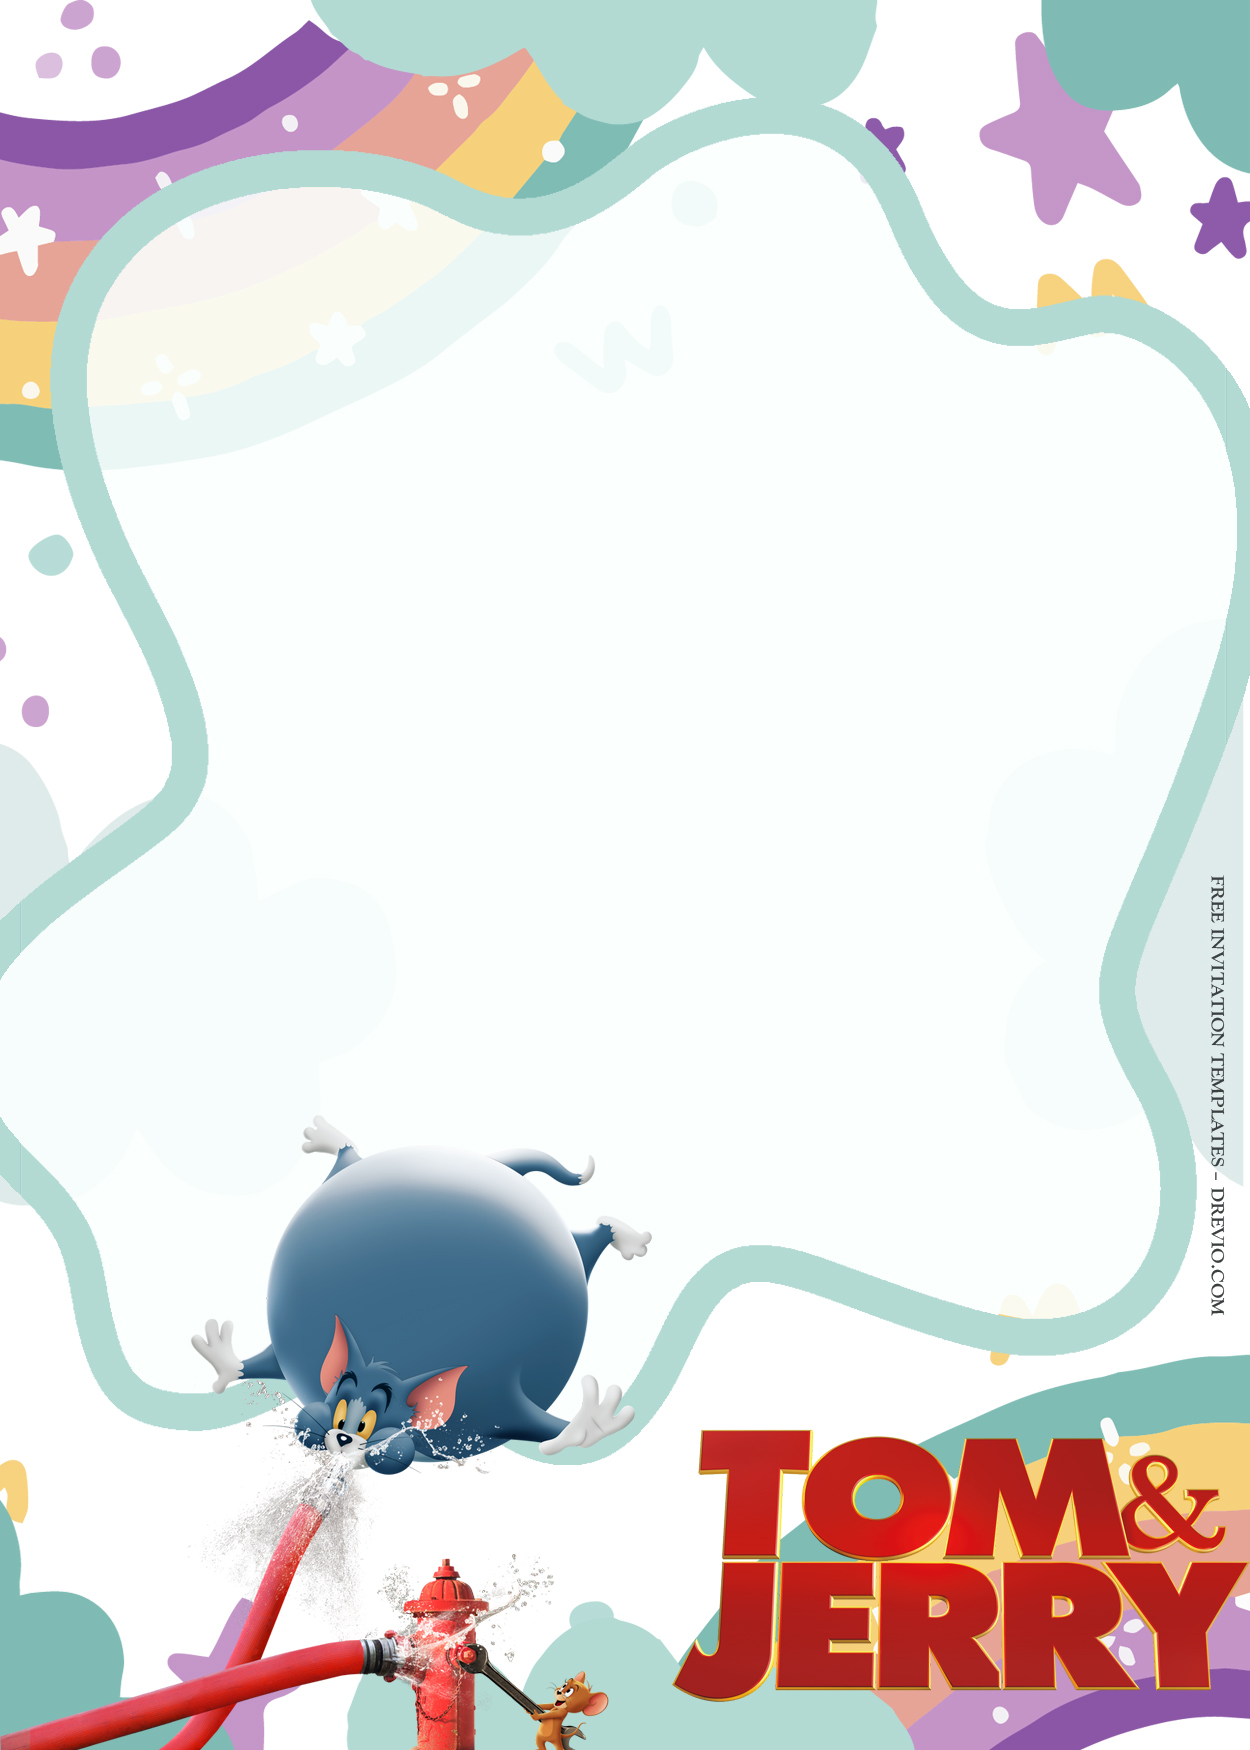 9+ Tom And Jerry In Town Birthday Invitation Templates Three